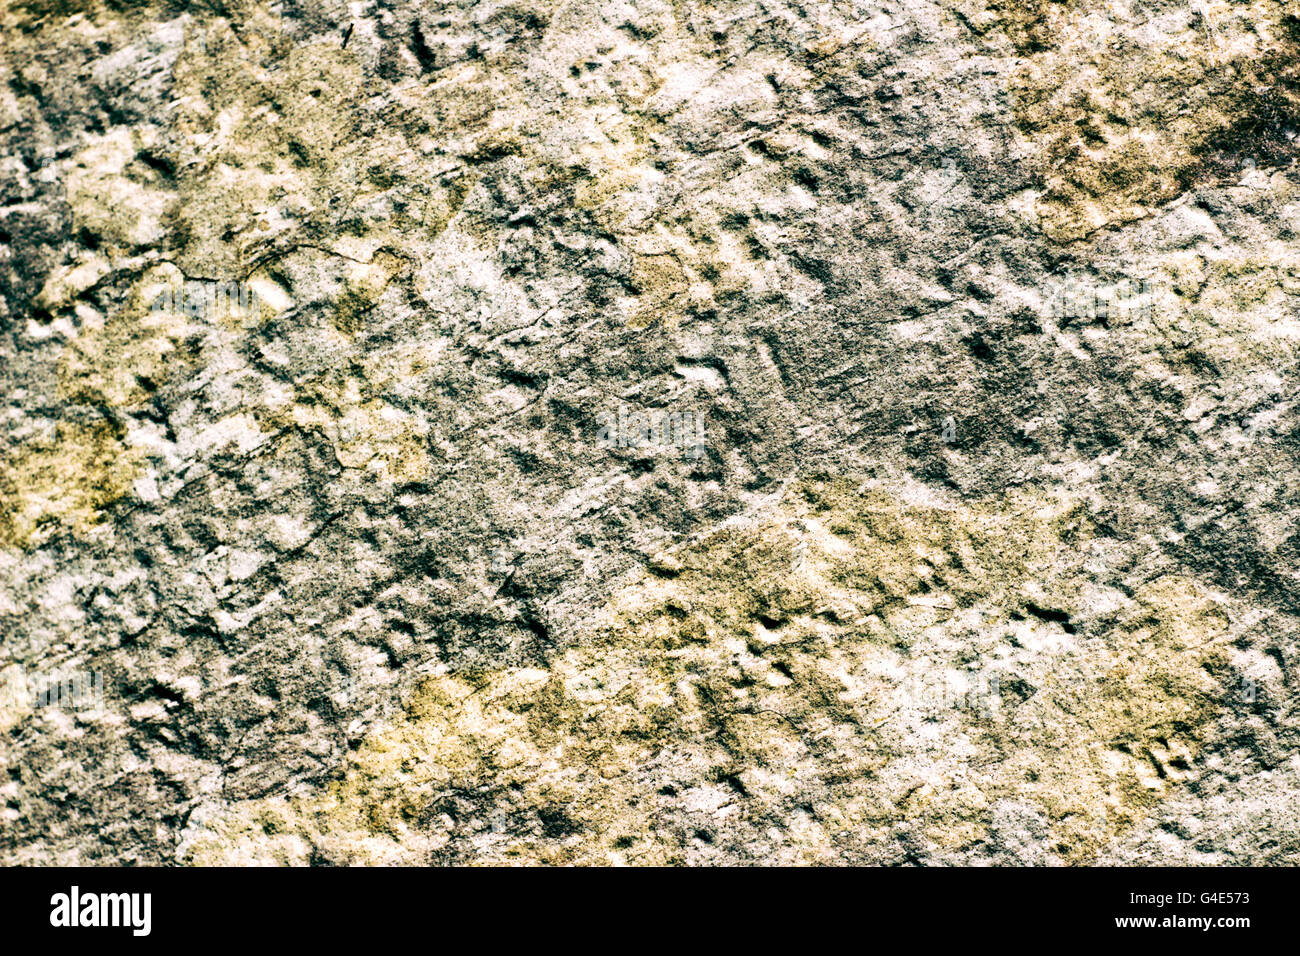 Photograph of a stone texture or background Stock Photo